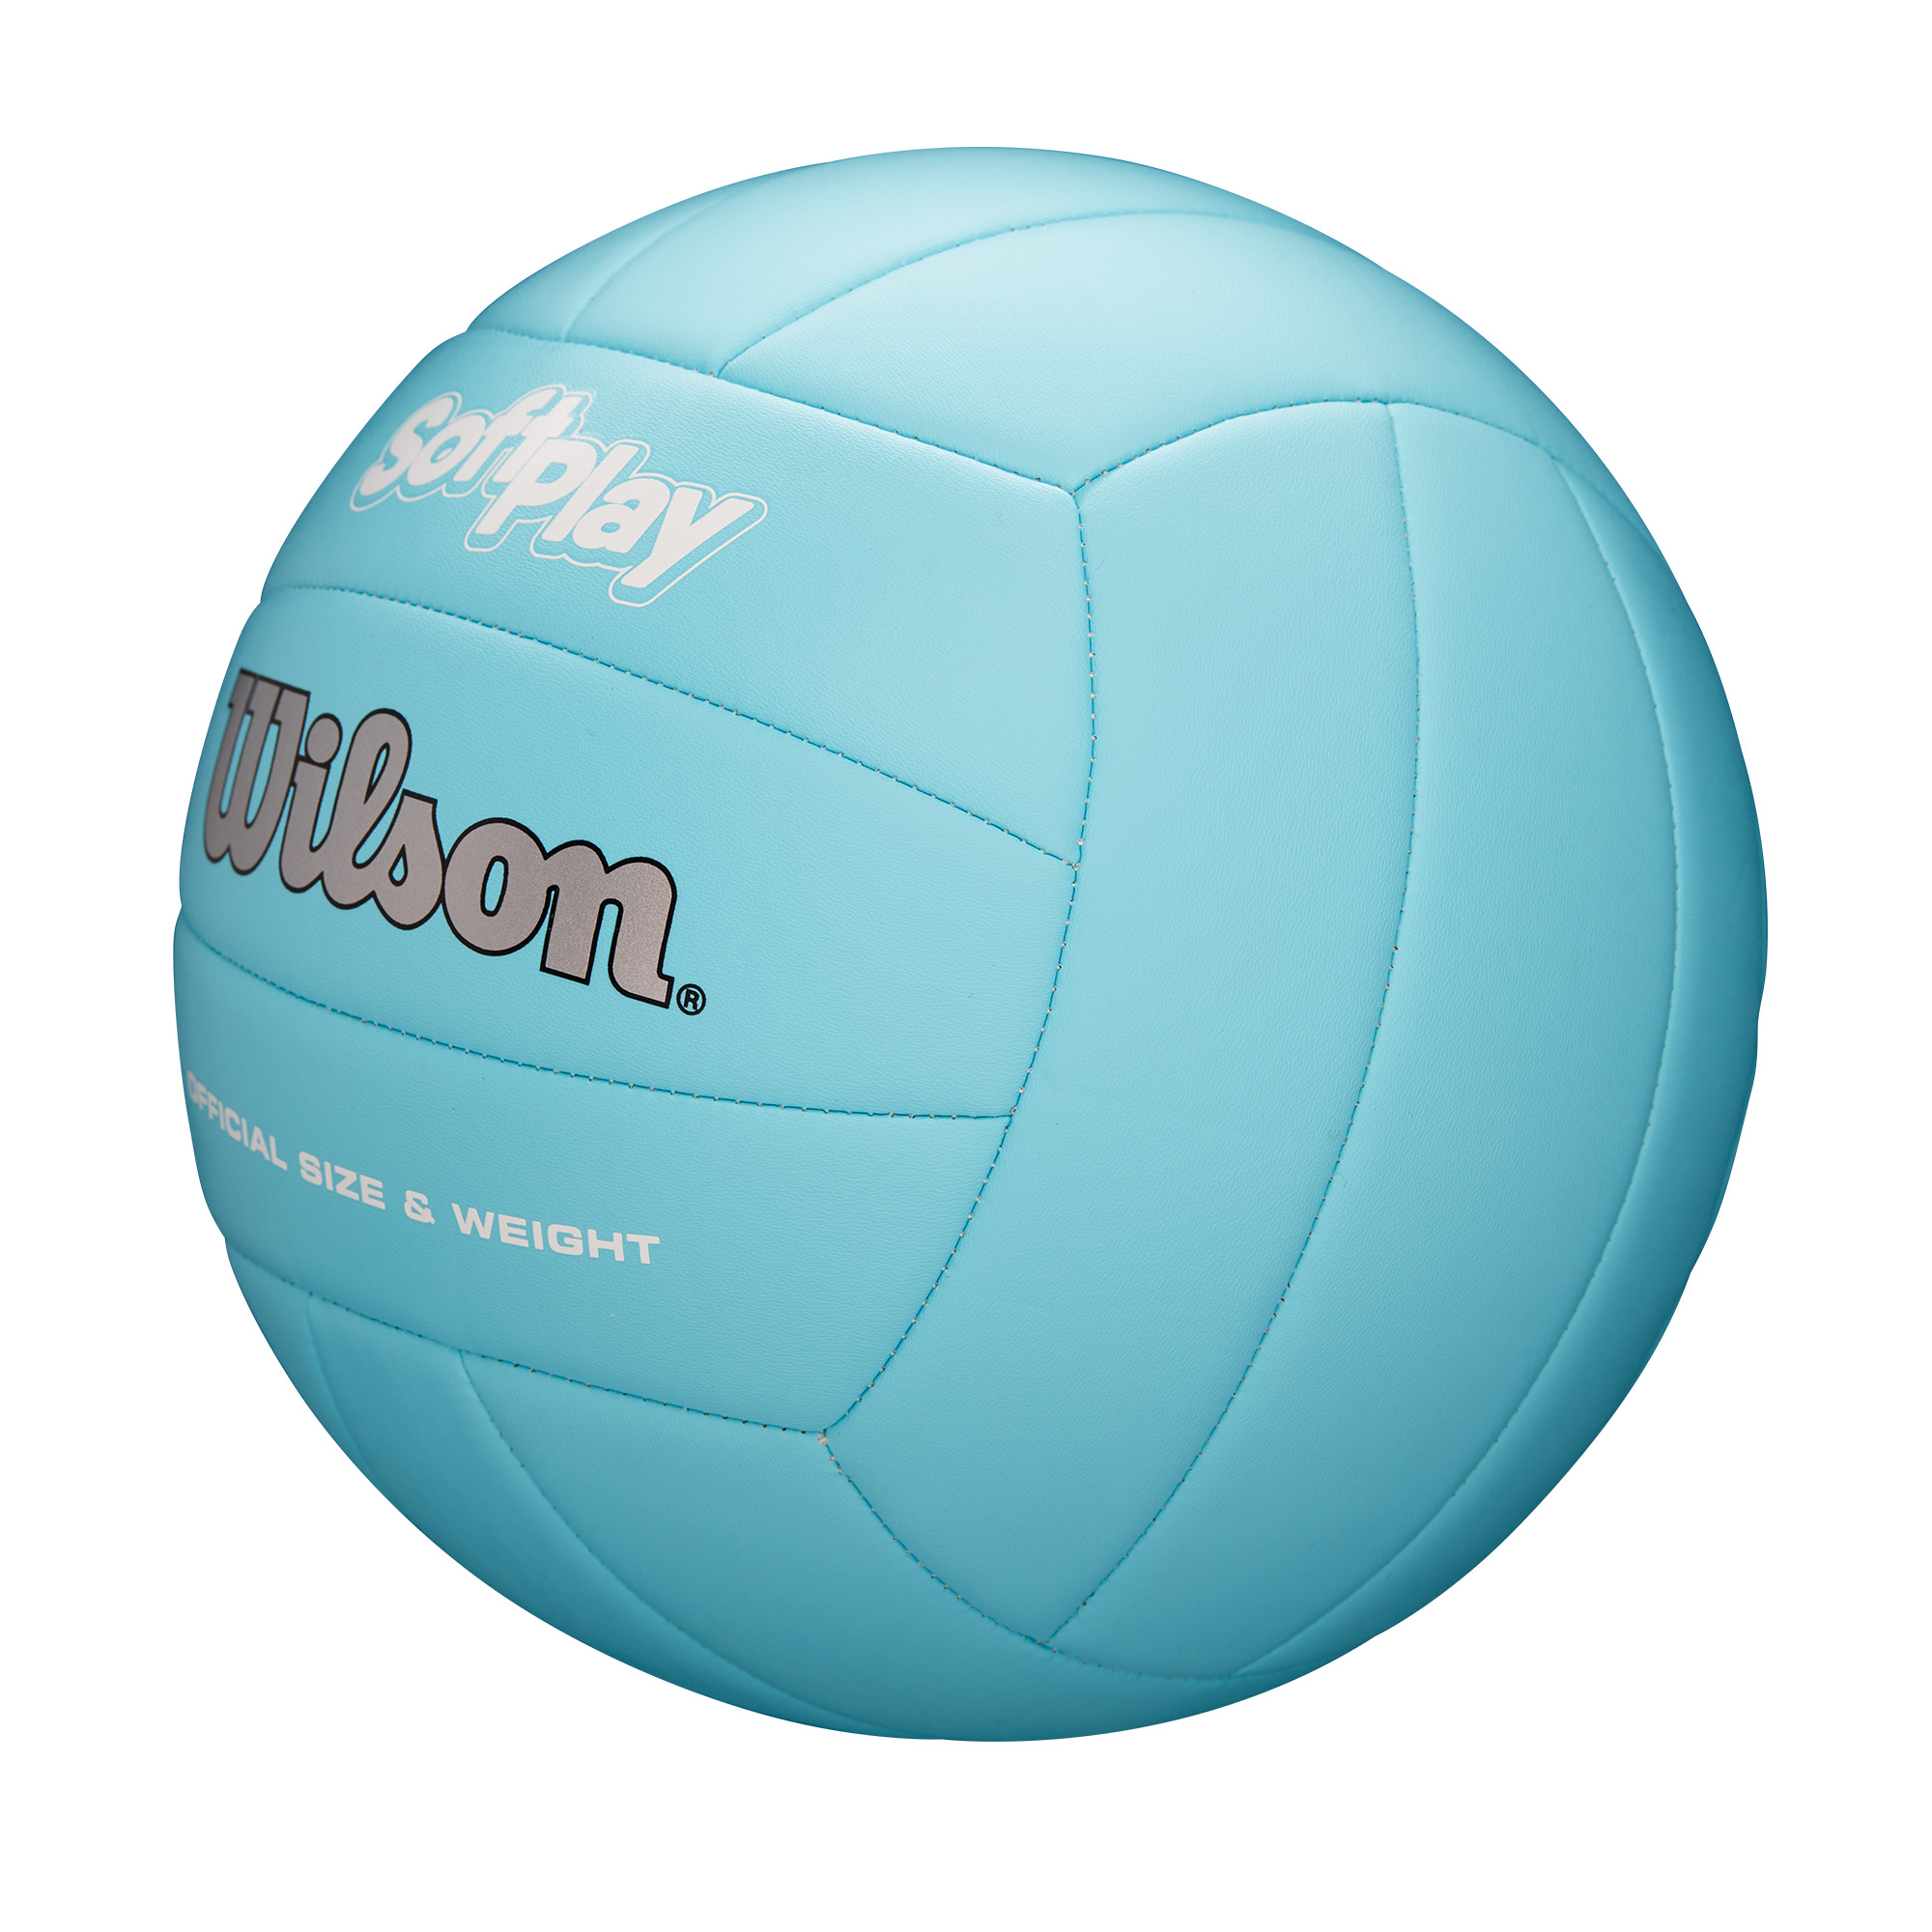 Wilson Soft Play Outdoor Volleyball, Official Size, Blue - image 3 of 7